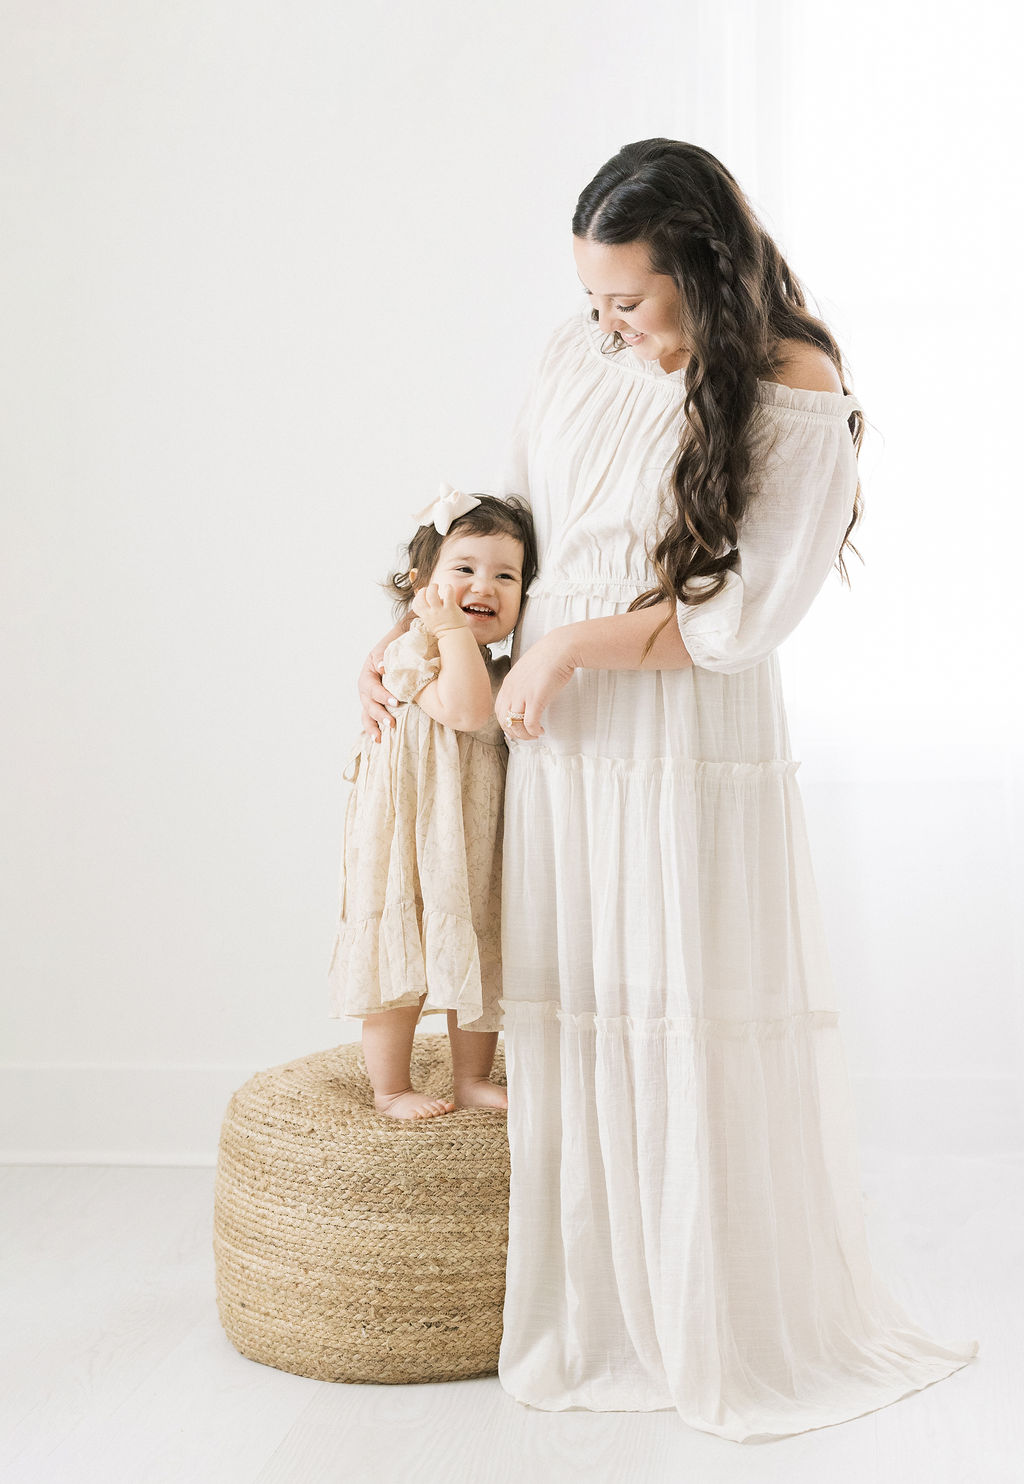 Mother and daughter stand together and play in a studio atlantic maternal fetal medicine